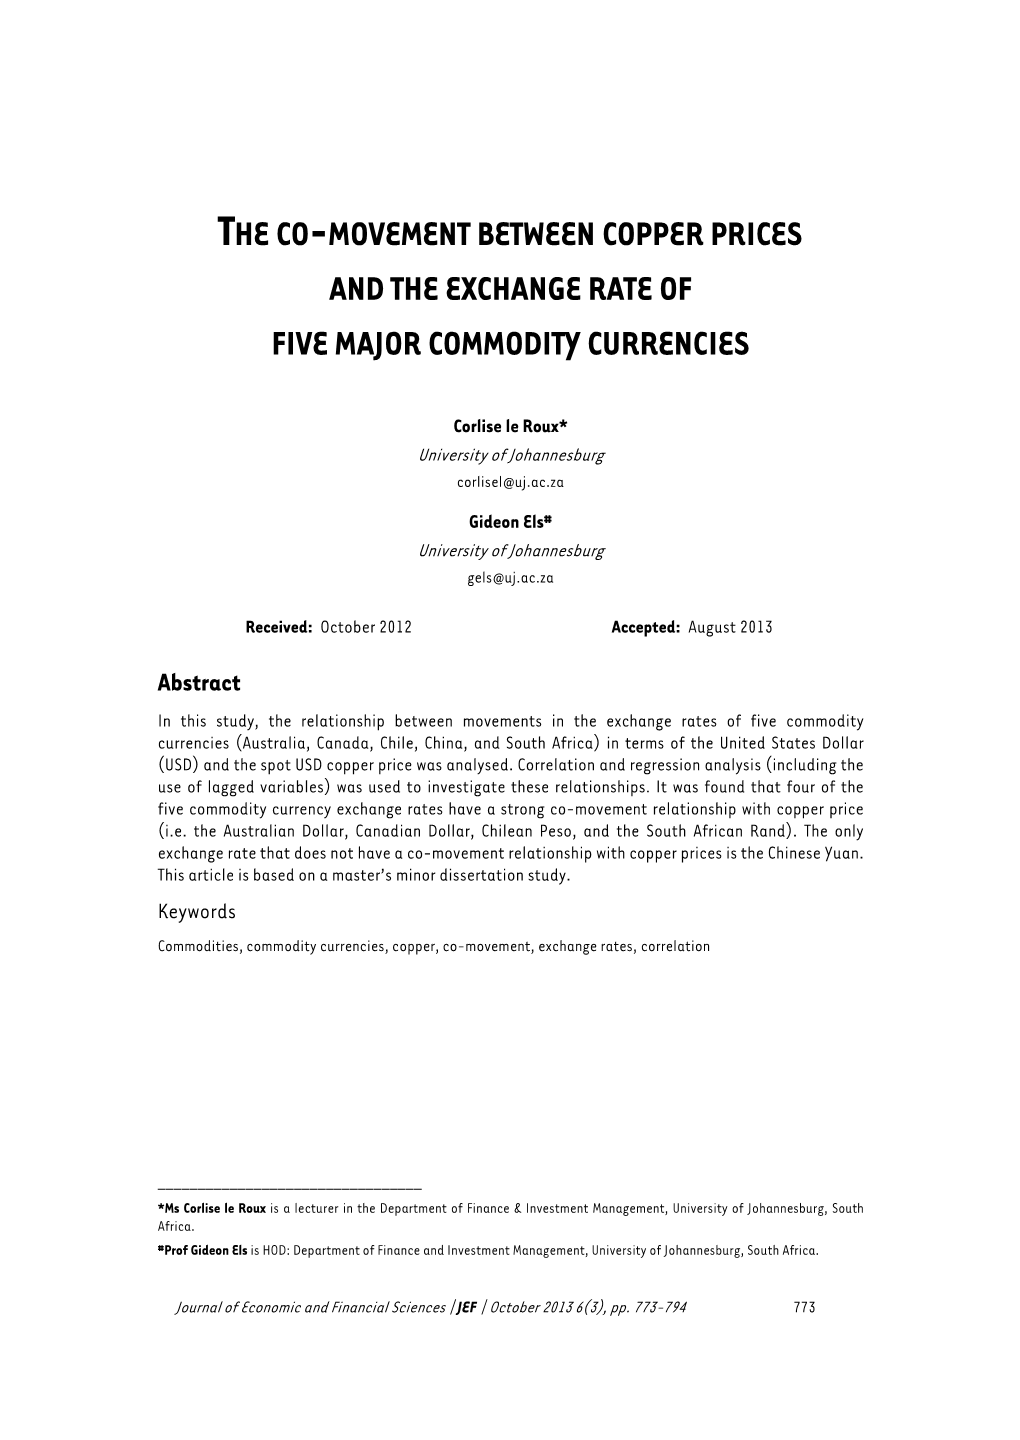 The Co-Movement Between Copper Prices and the Exchange Rate of Five Major Commodity Currencies